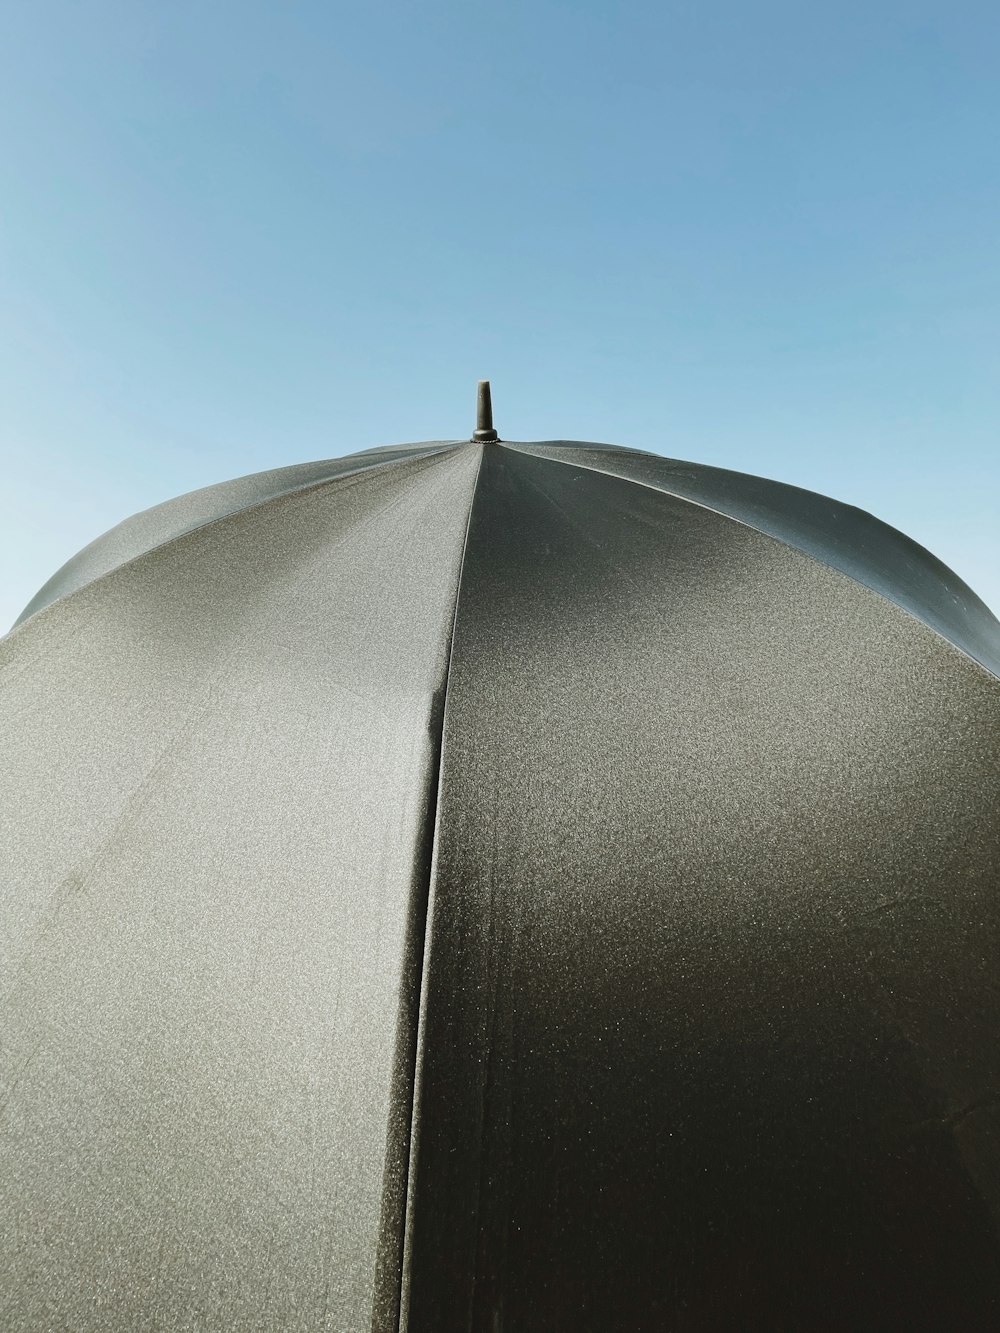 a black umbrella with a blue sky in the background